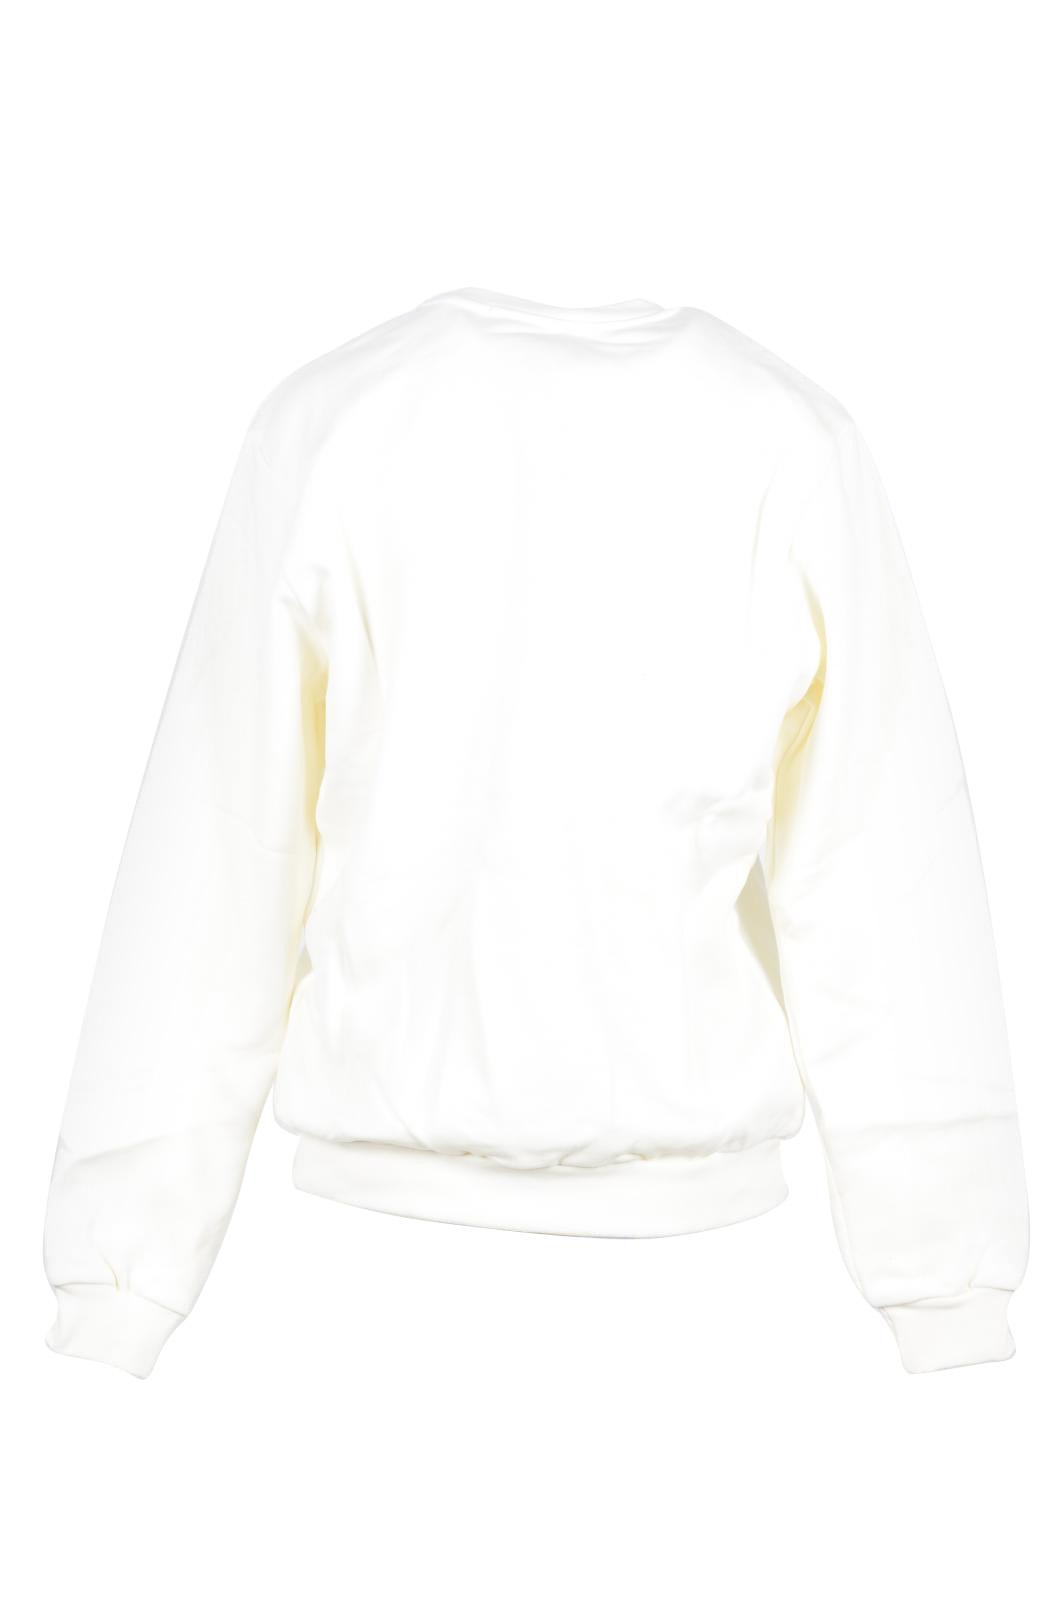 Off White & Gold Cotton Women's Sweater展示图